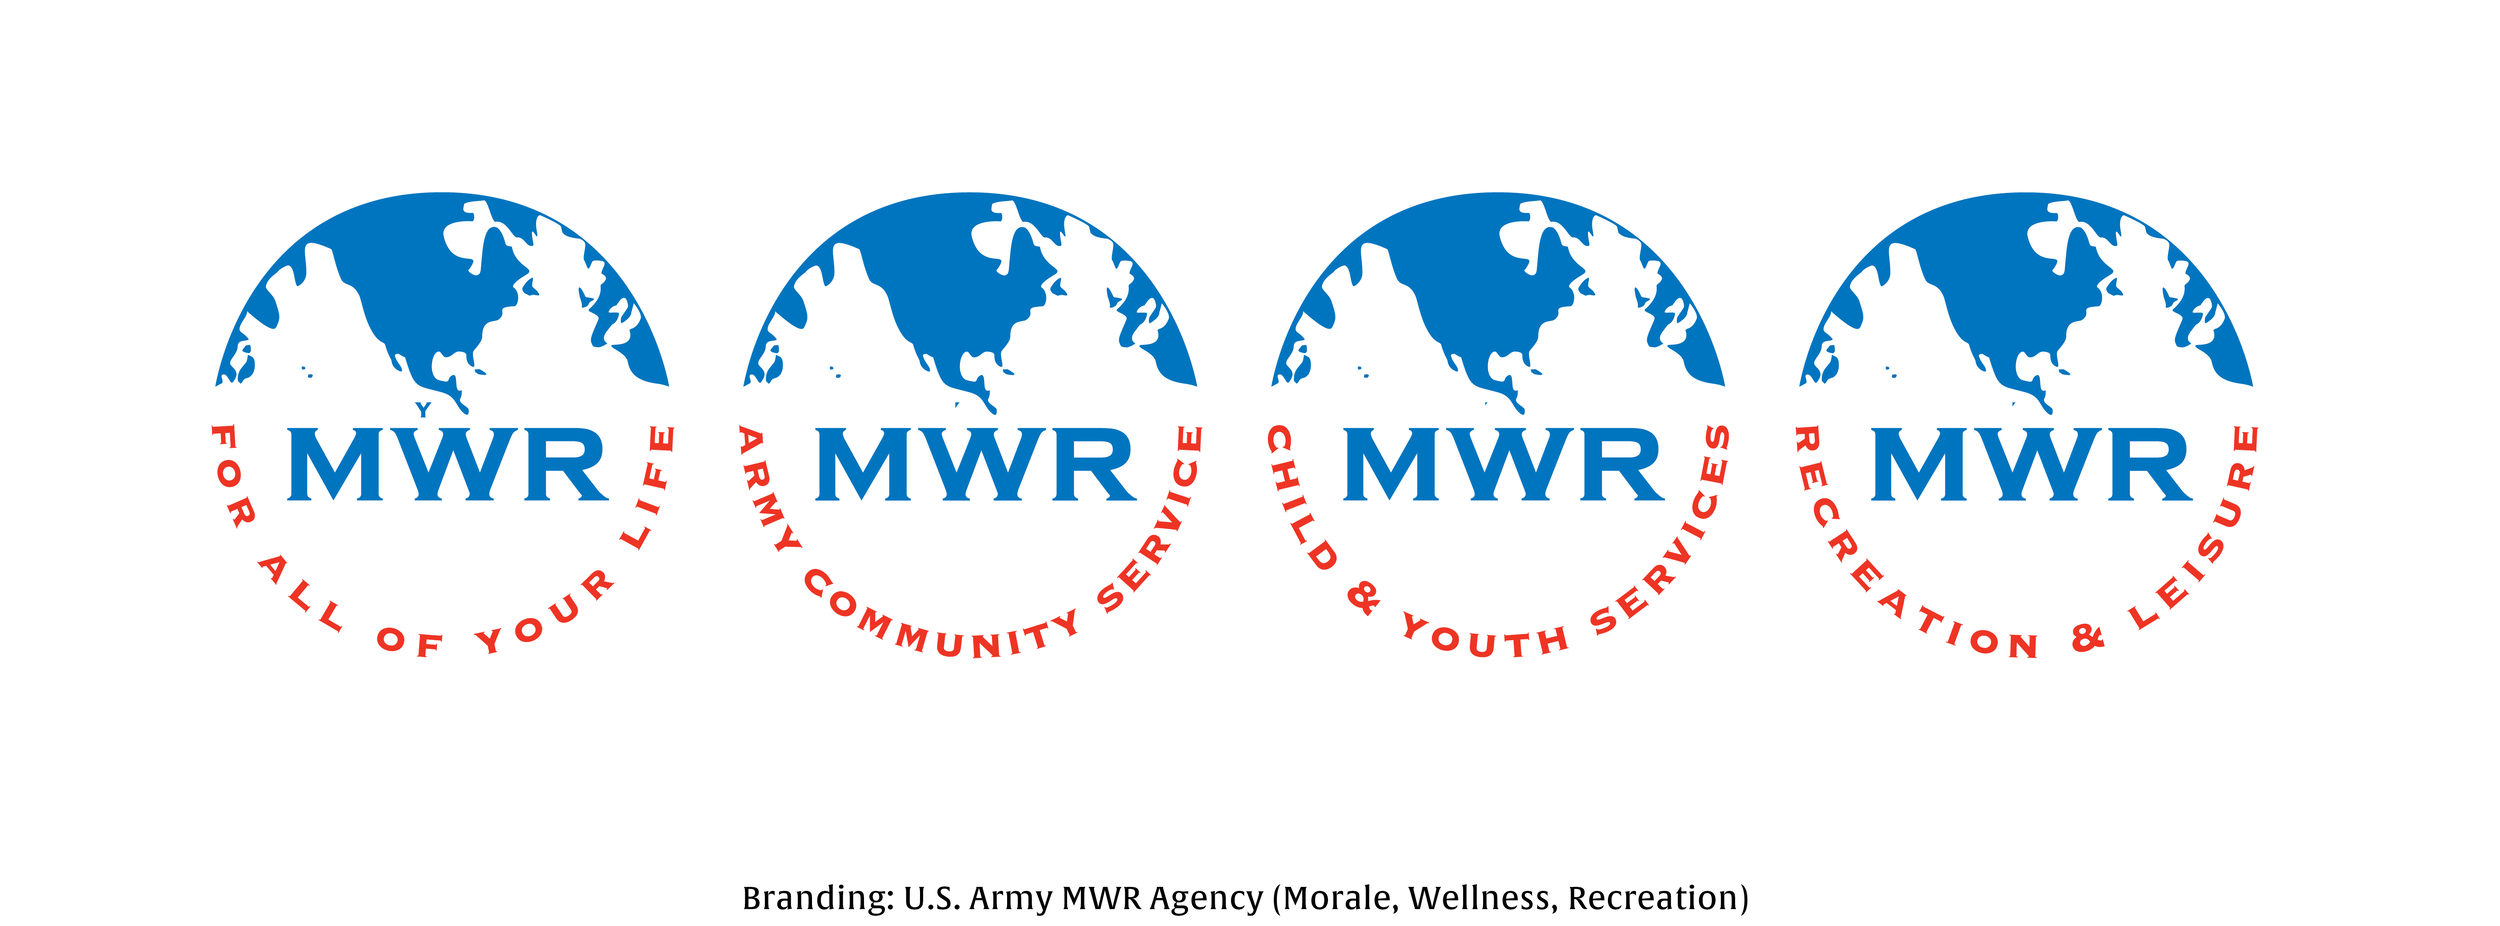 Army MWR Logos.png